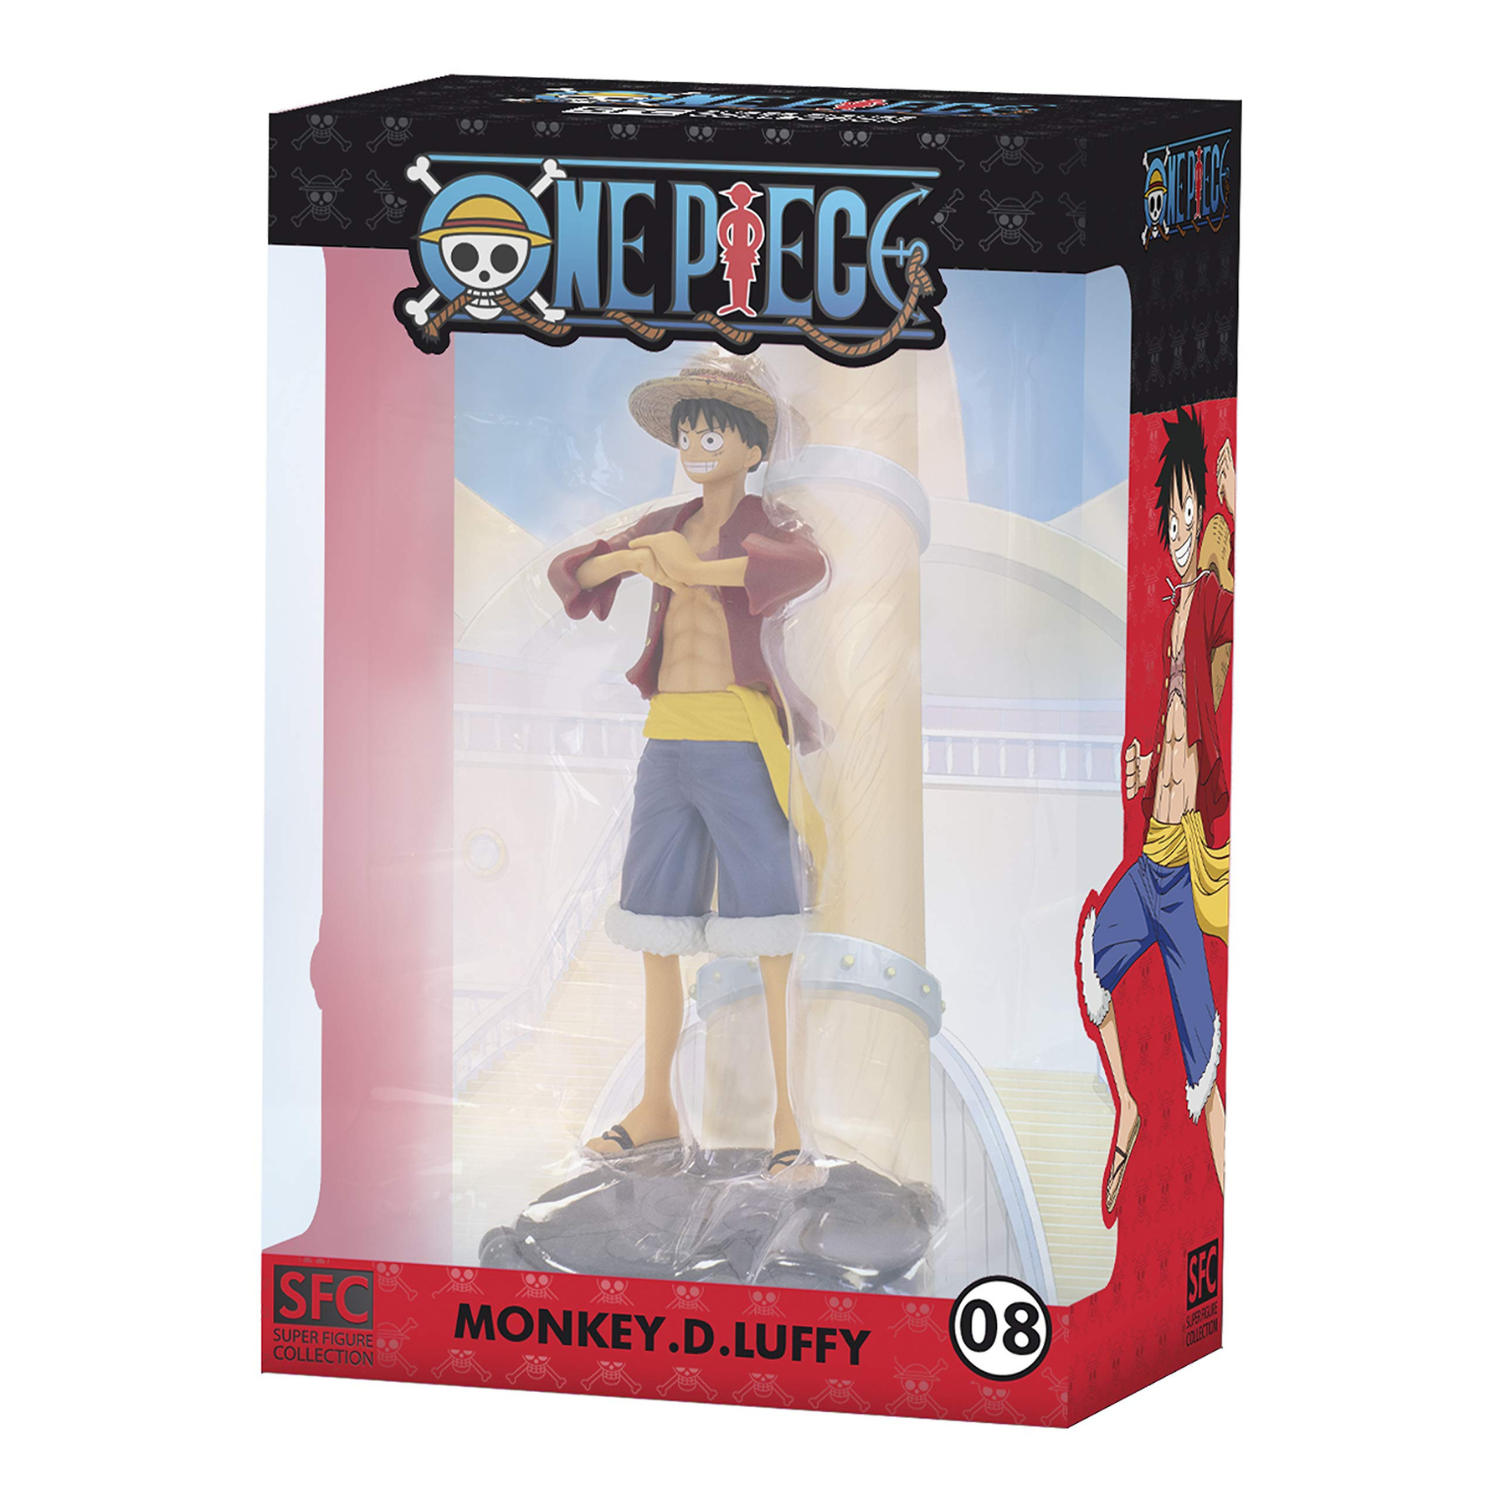 ABYstyle One piece - Monkey D. Luffy Figurine Super Figure Collection